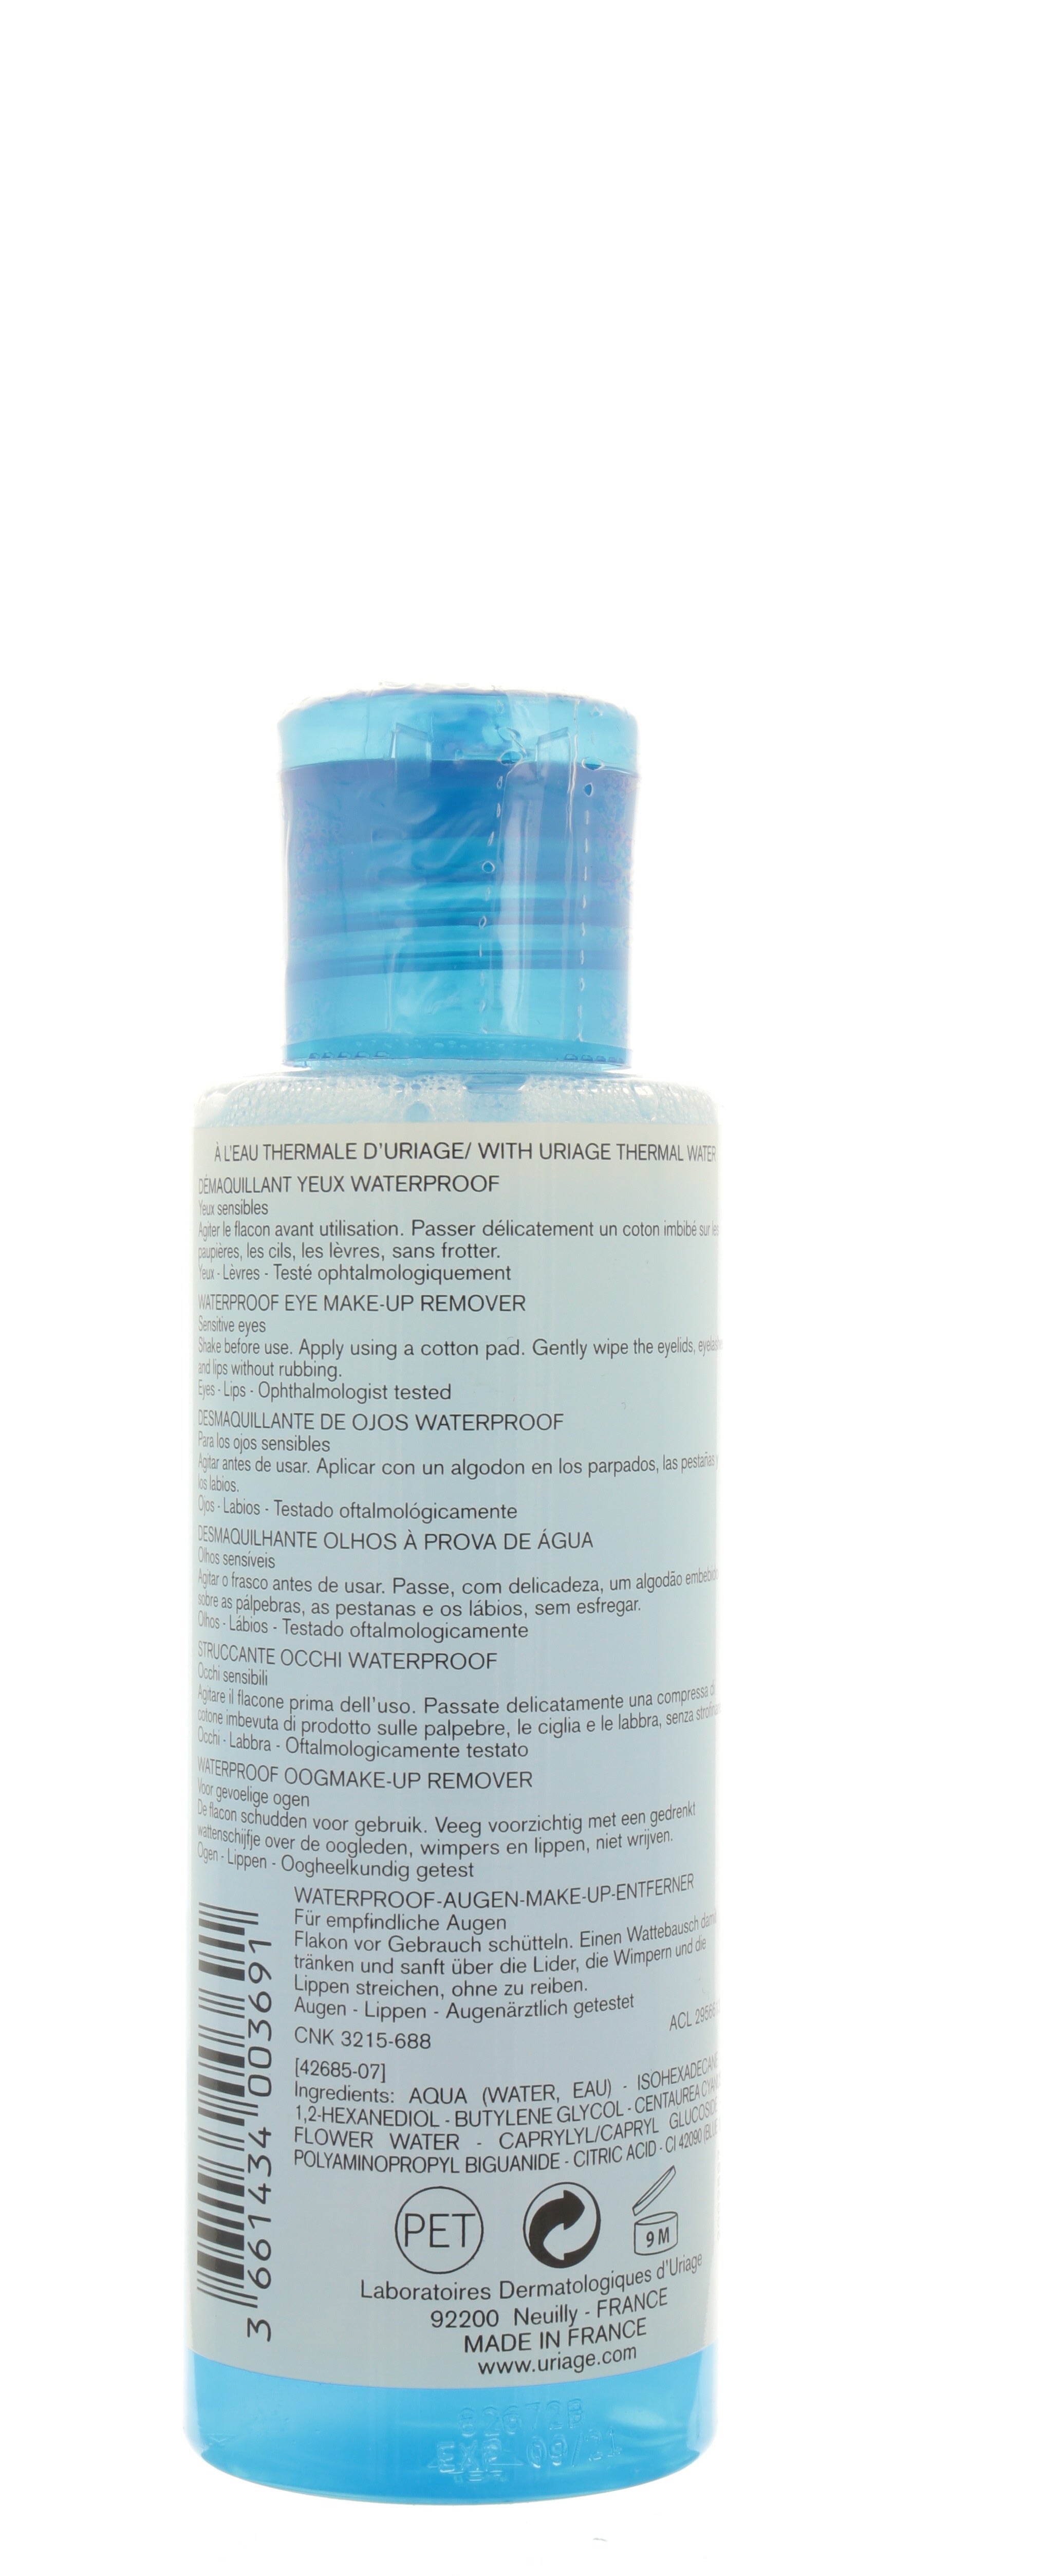 Uriage Démaquillant Yeux Waterproof Flacon 100ml